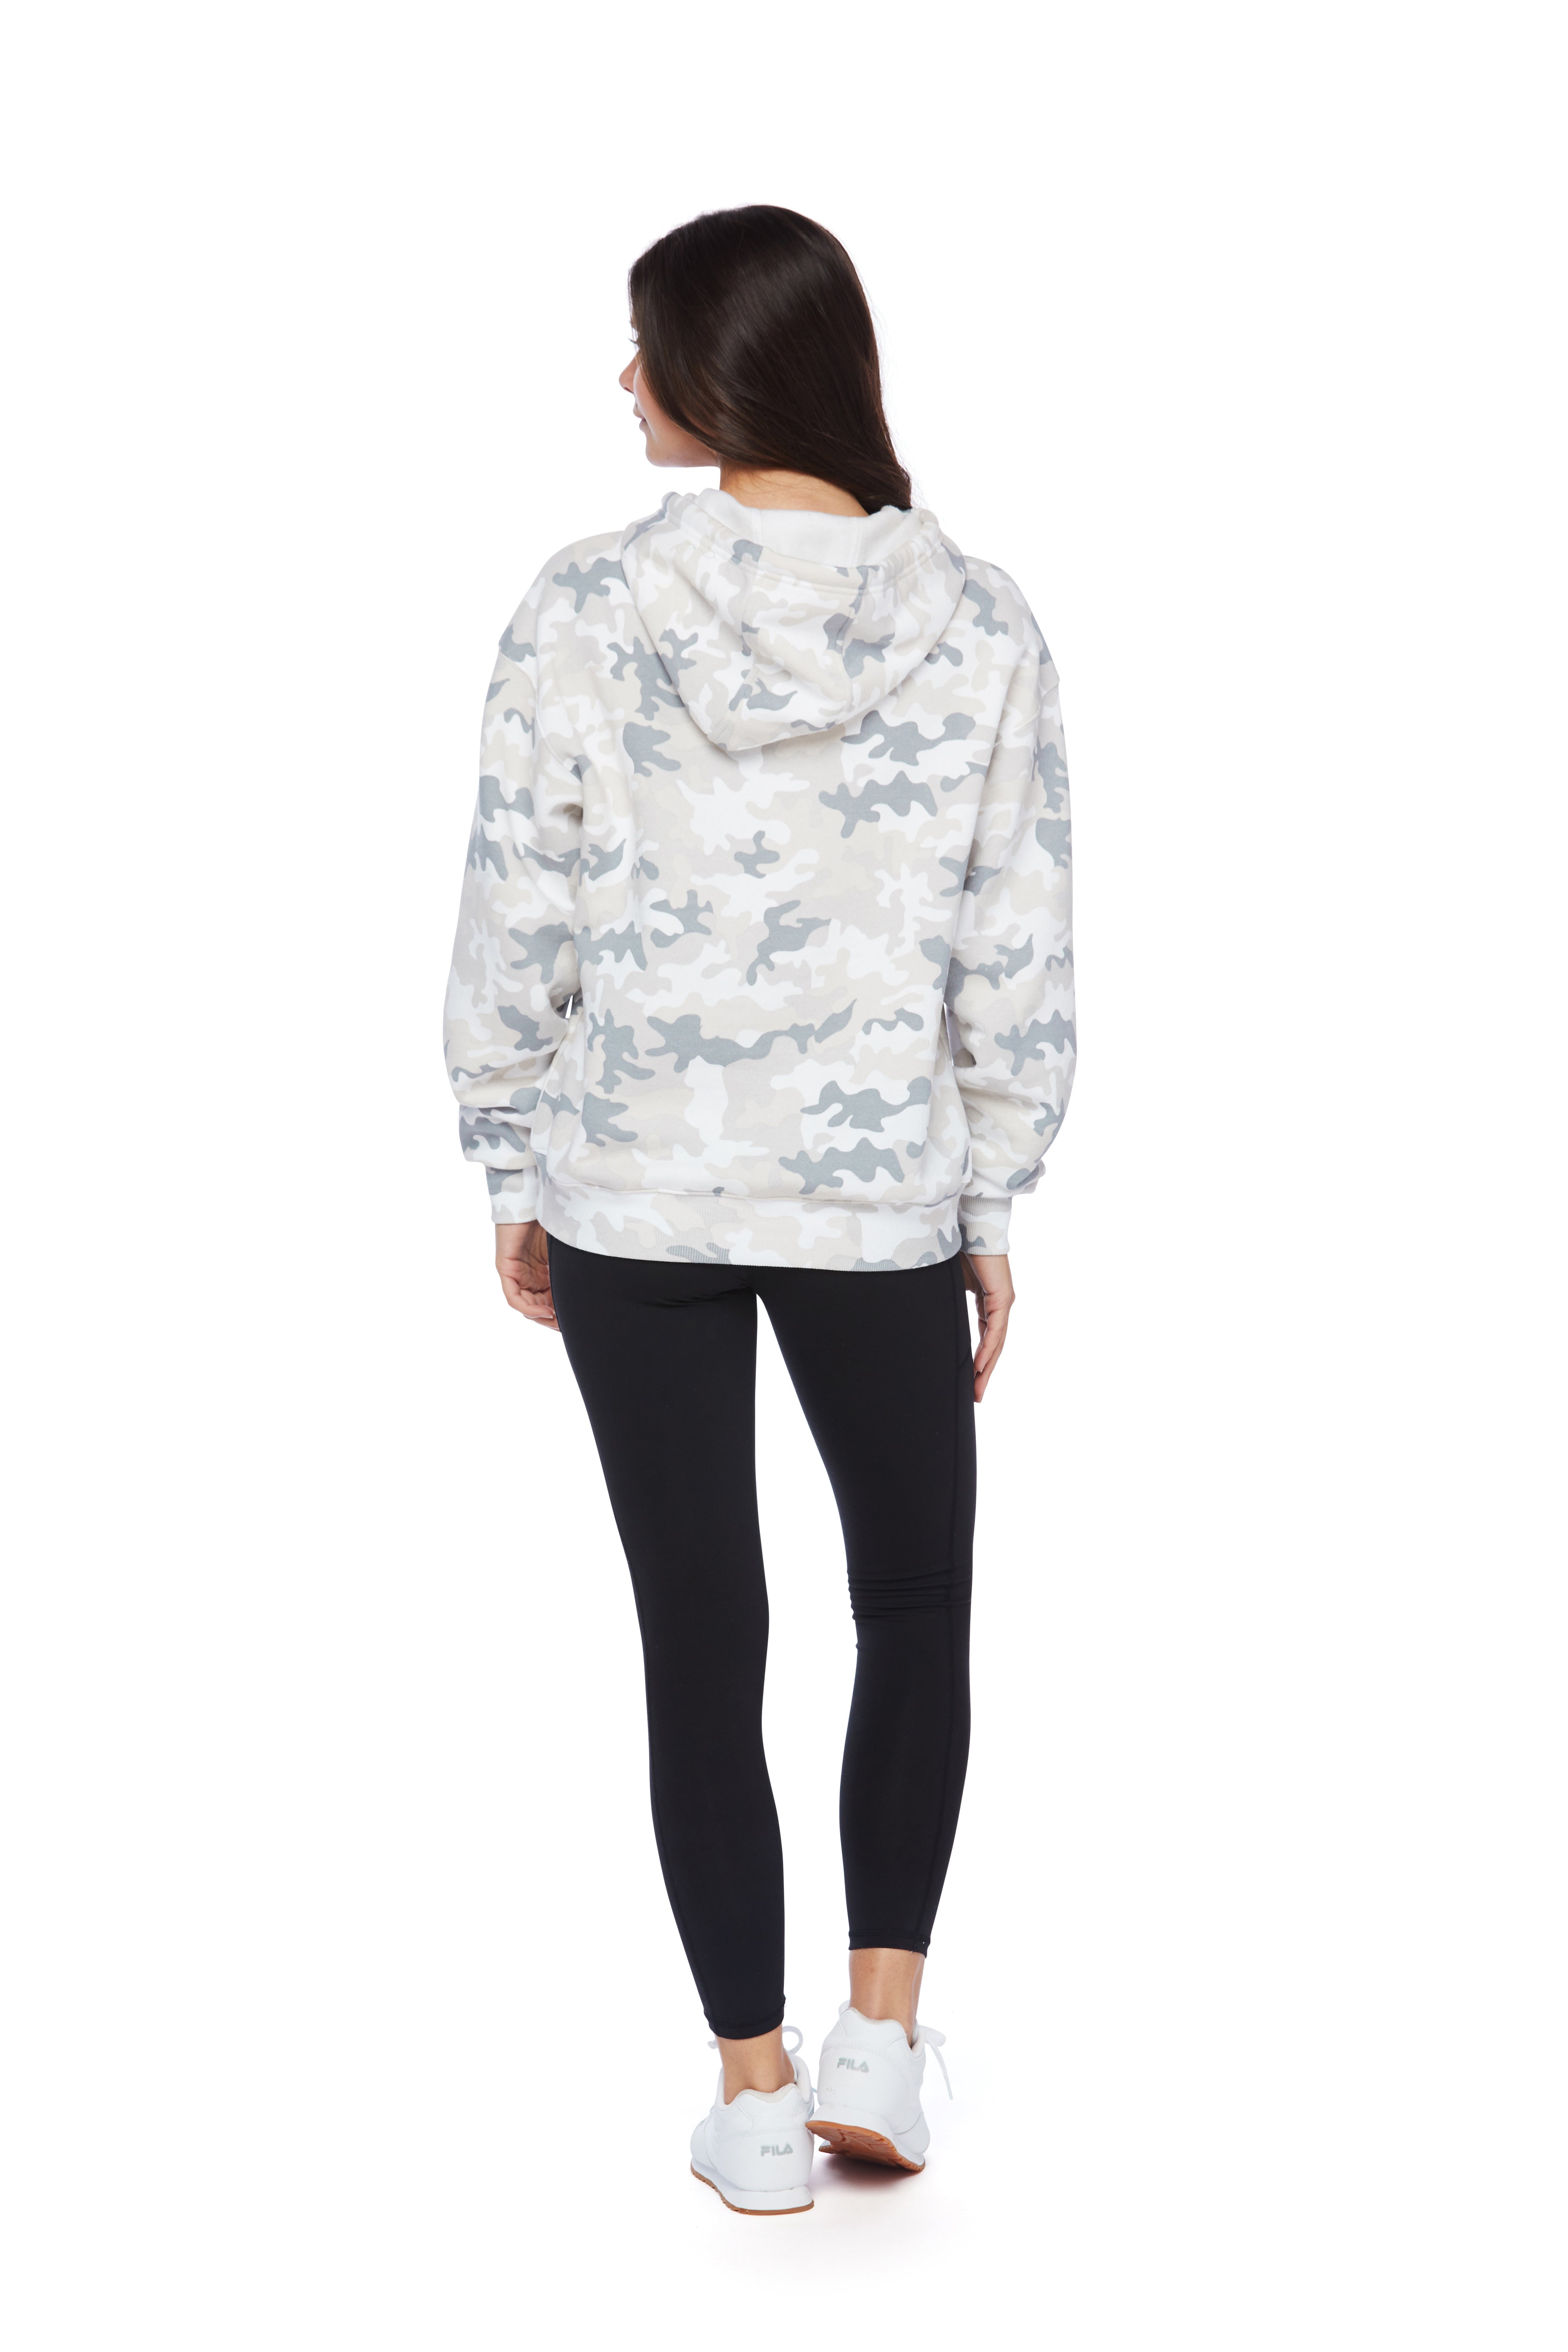 Chloe Relaxed Fit Hoodie in White Camo from Lazypants - always a great buy at a reasonable price.